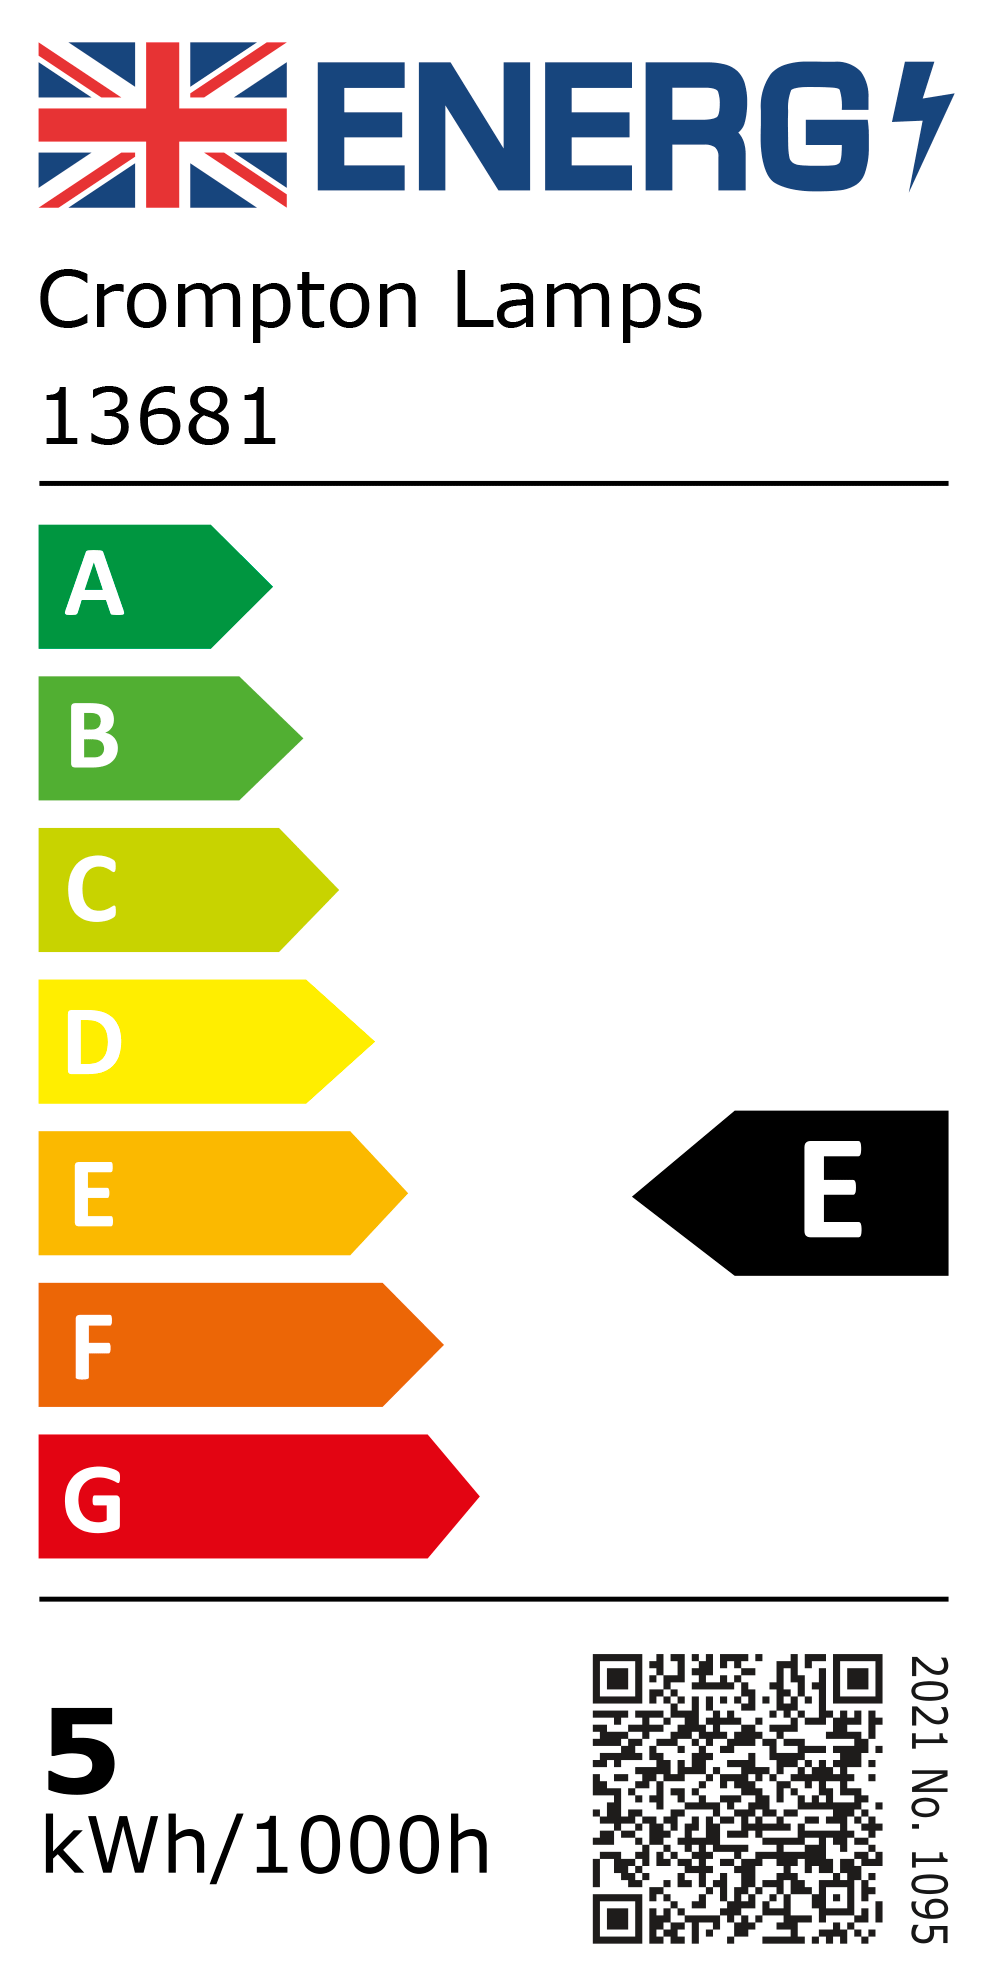 New 2021 Energy Rating Label: Stock Code 13681